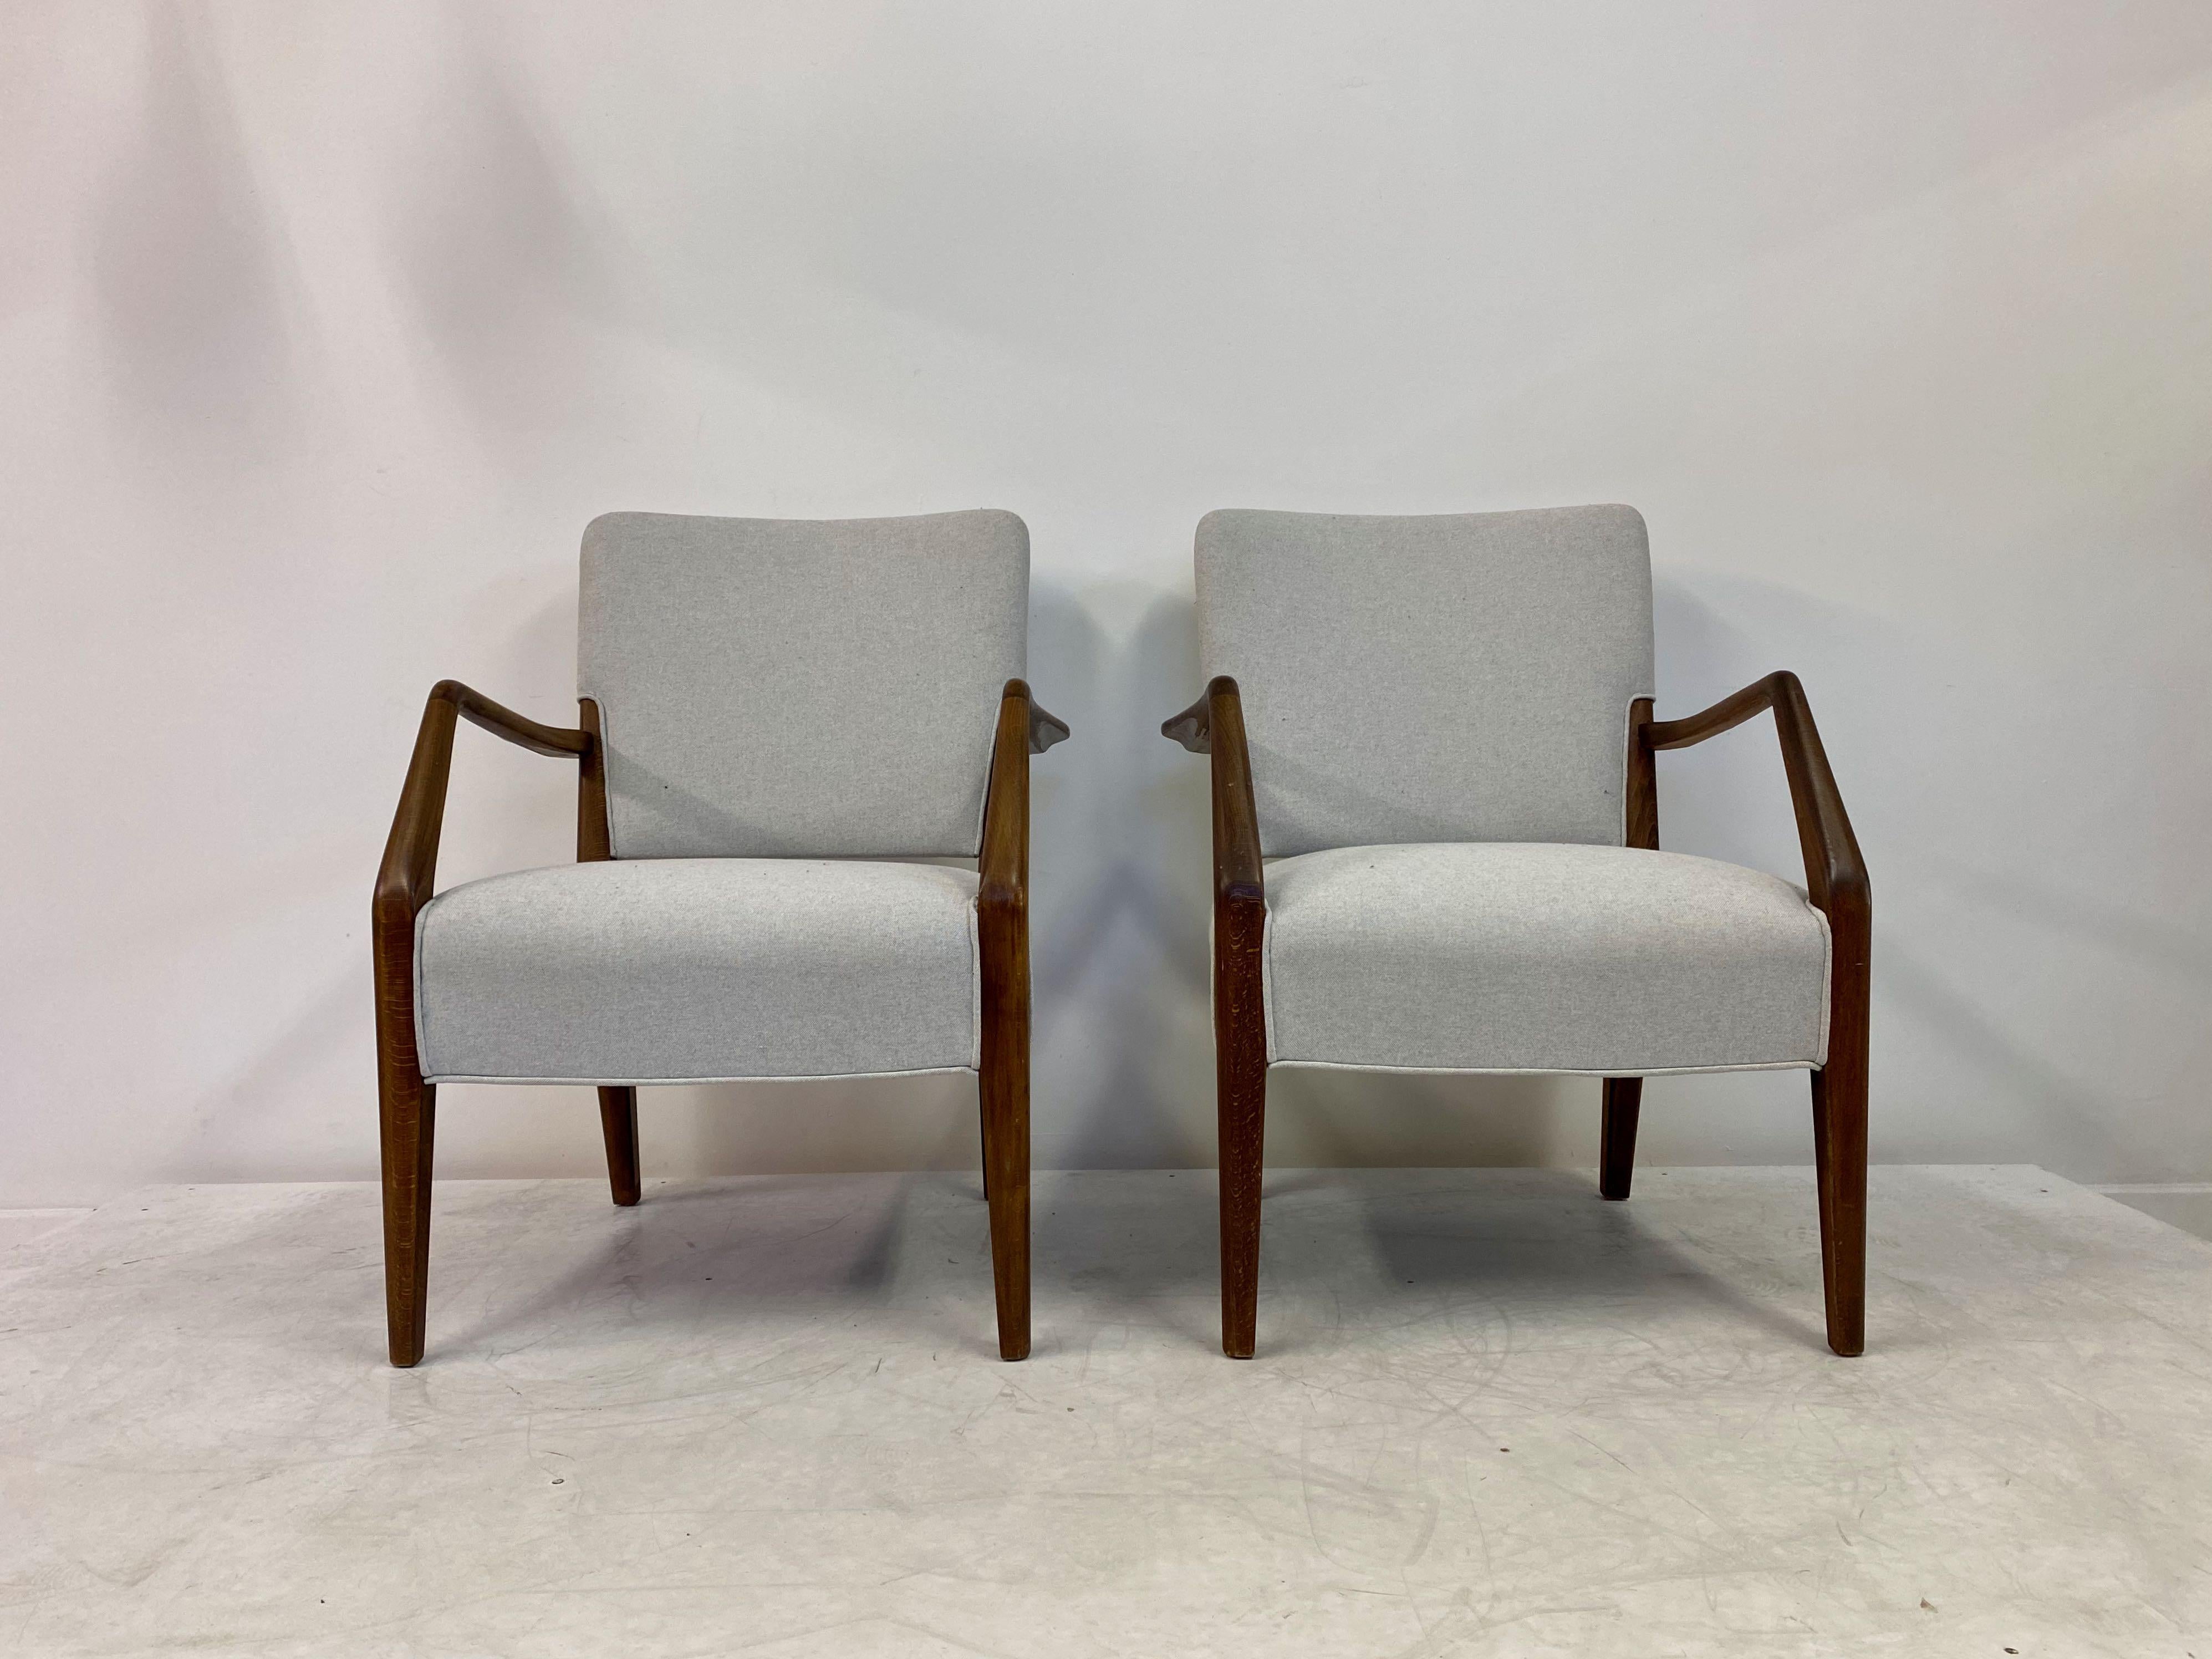 Pair of armchairs

By Peter Hvidt and Orla Molgaard-Nielsen

Manufactured by France & Daverkosen

Stained beech

New light grey wool upholstery

Mid 20th Century Danish

Seat height 43 cm